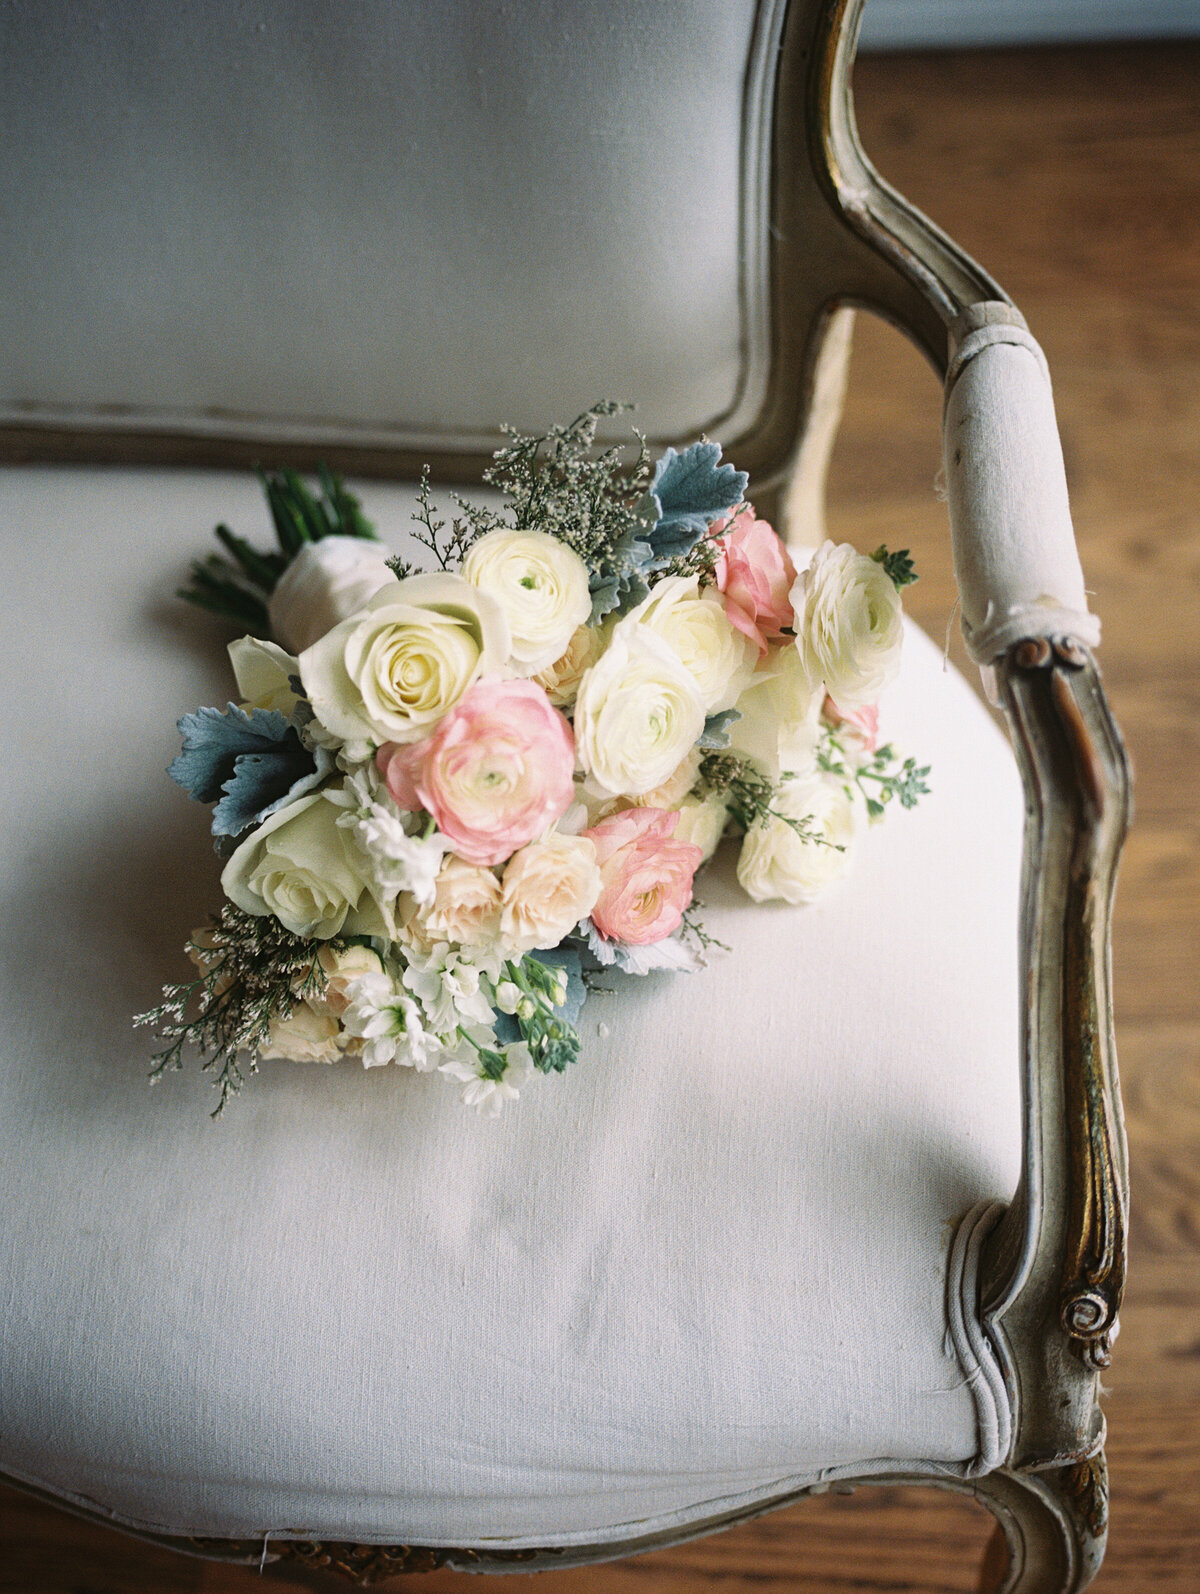 Bridal bouquet with white and pink flowers on film in chateau